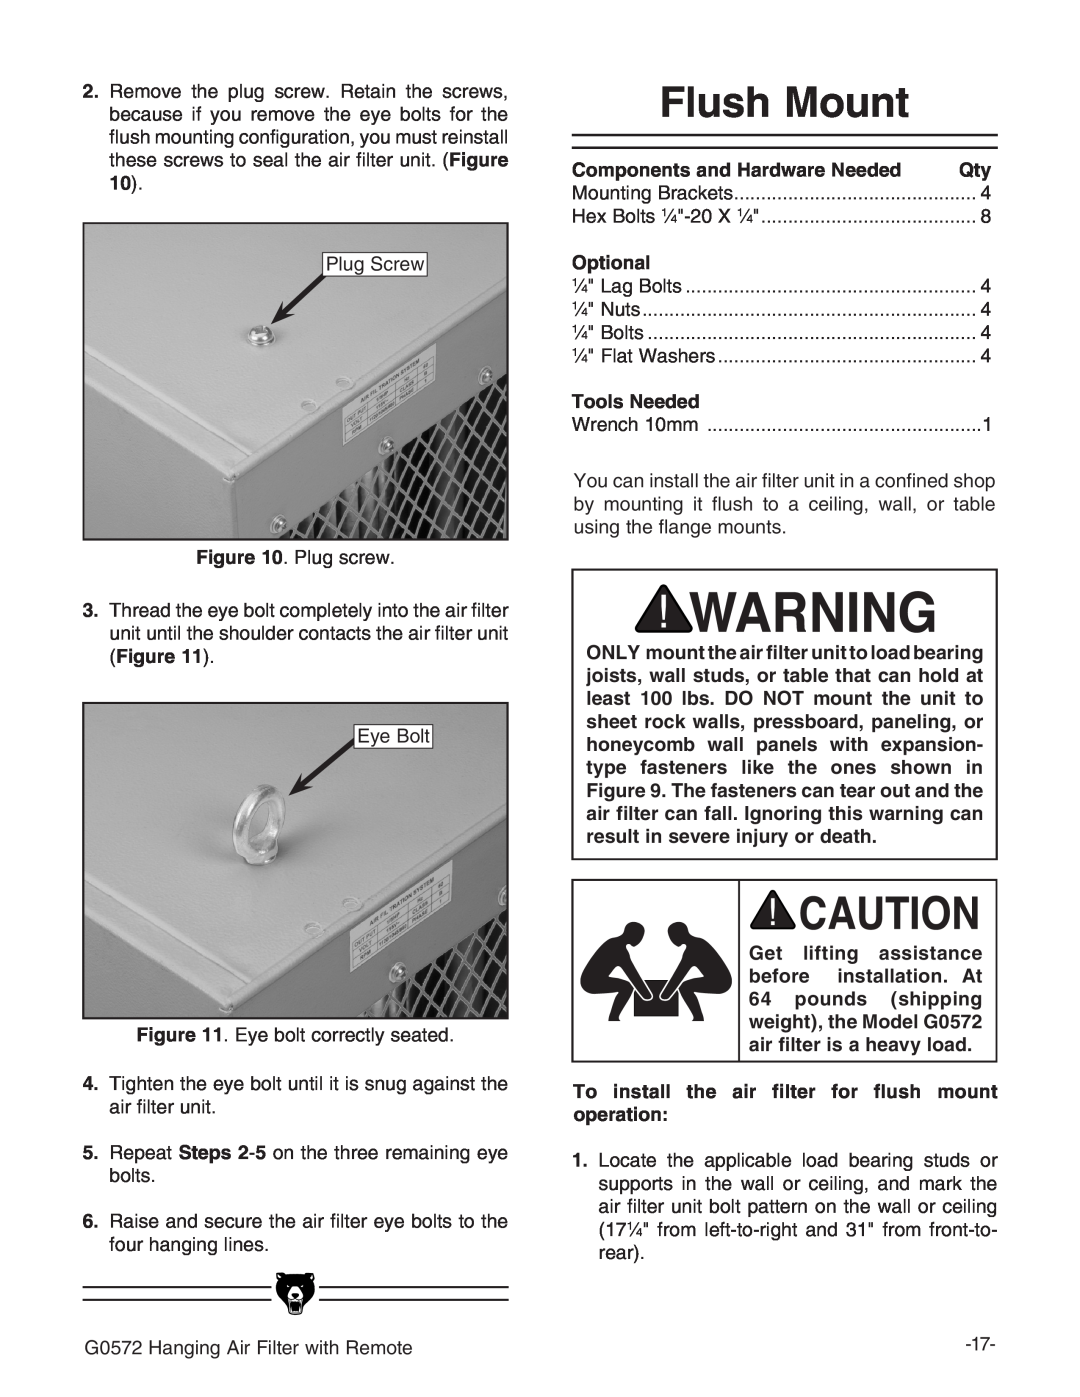 Grizzly G0572 instruction manual Flush Mount 